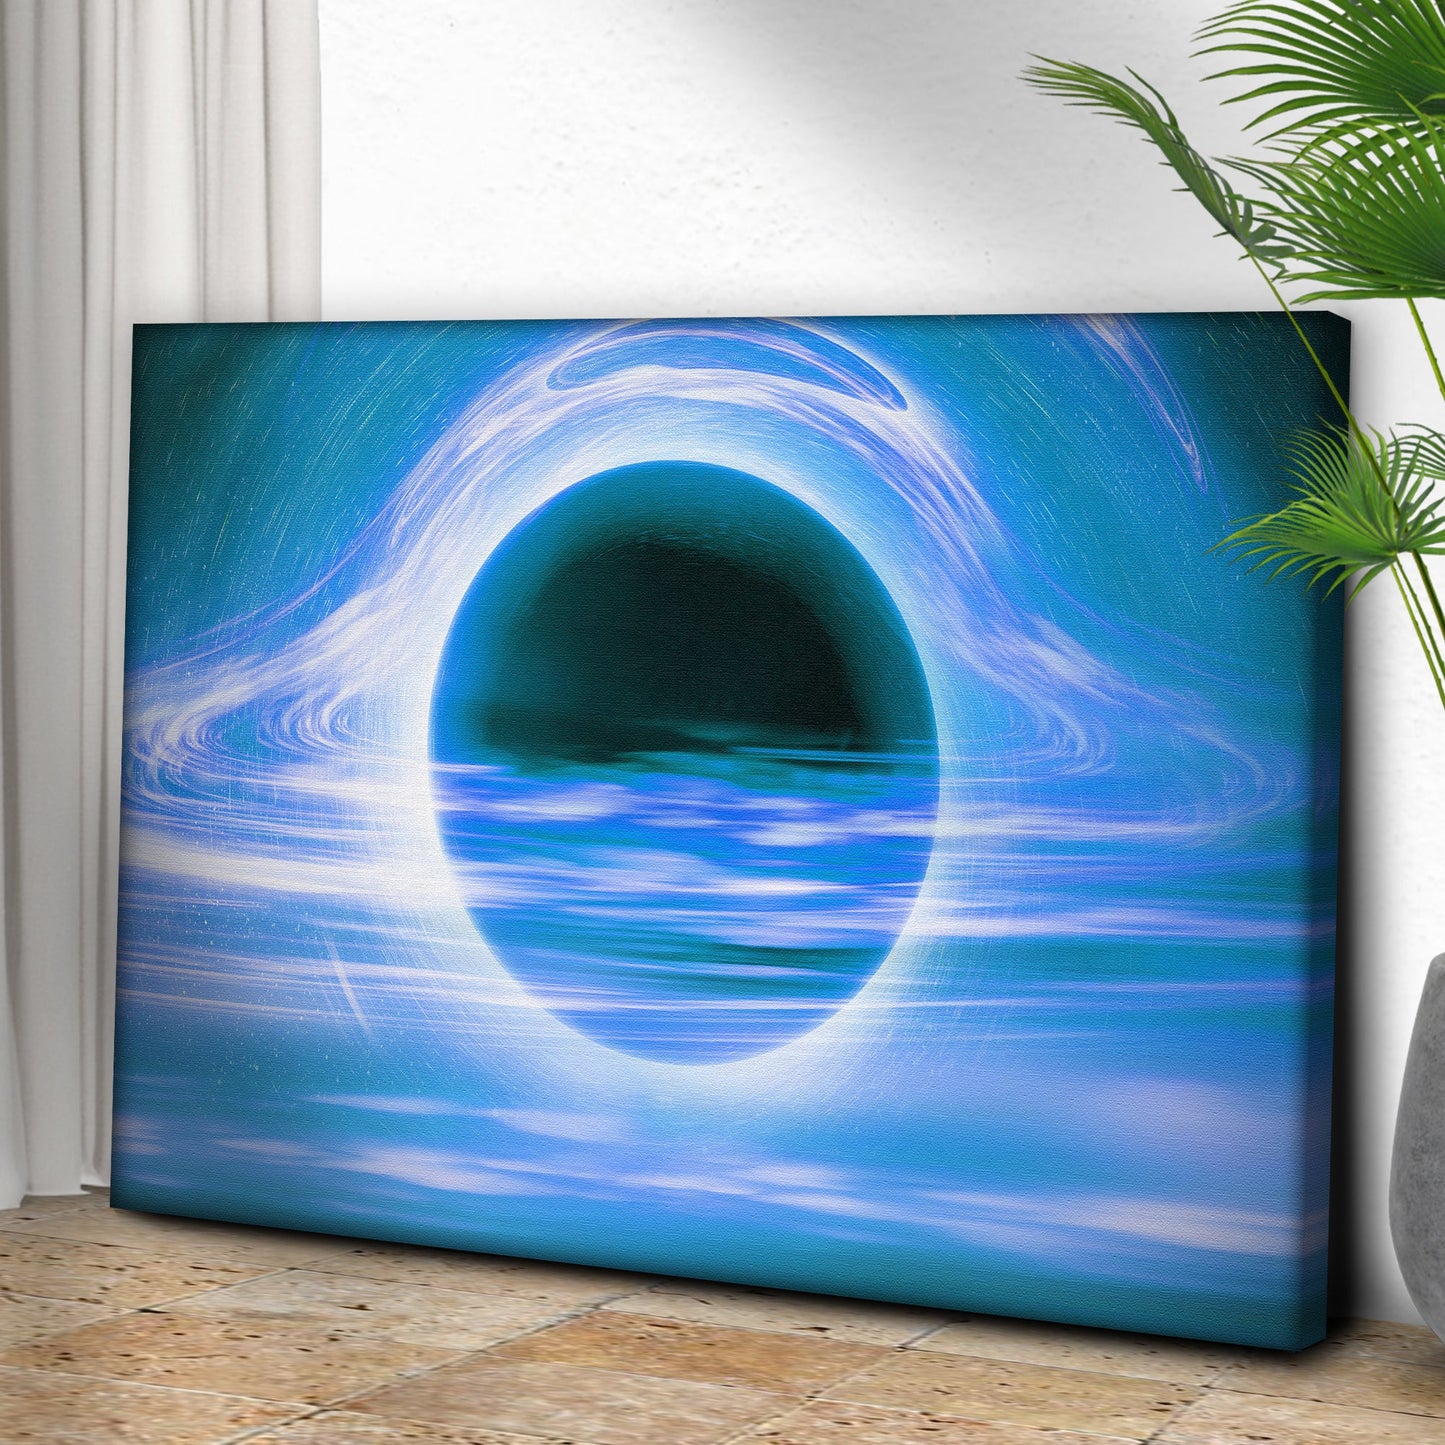 Cosmos Exploration  Black Hole in the Cosmos Canvas Wall Art